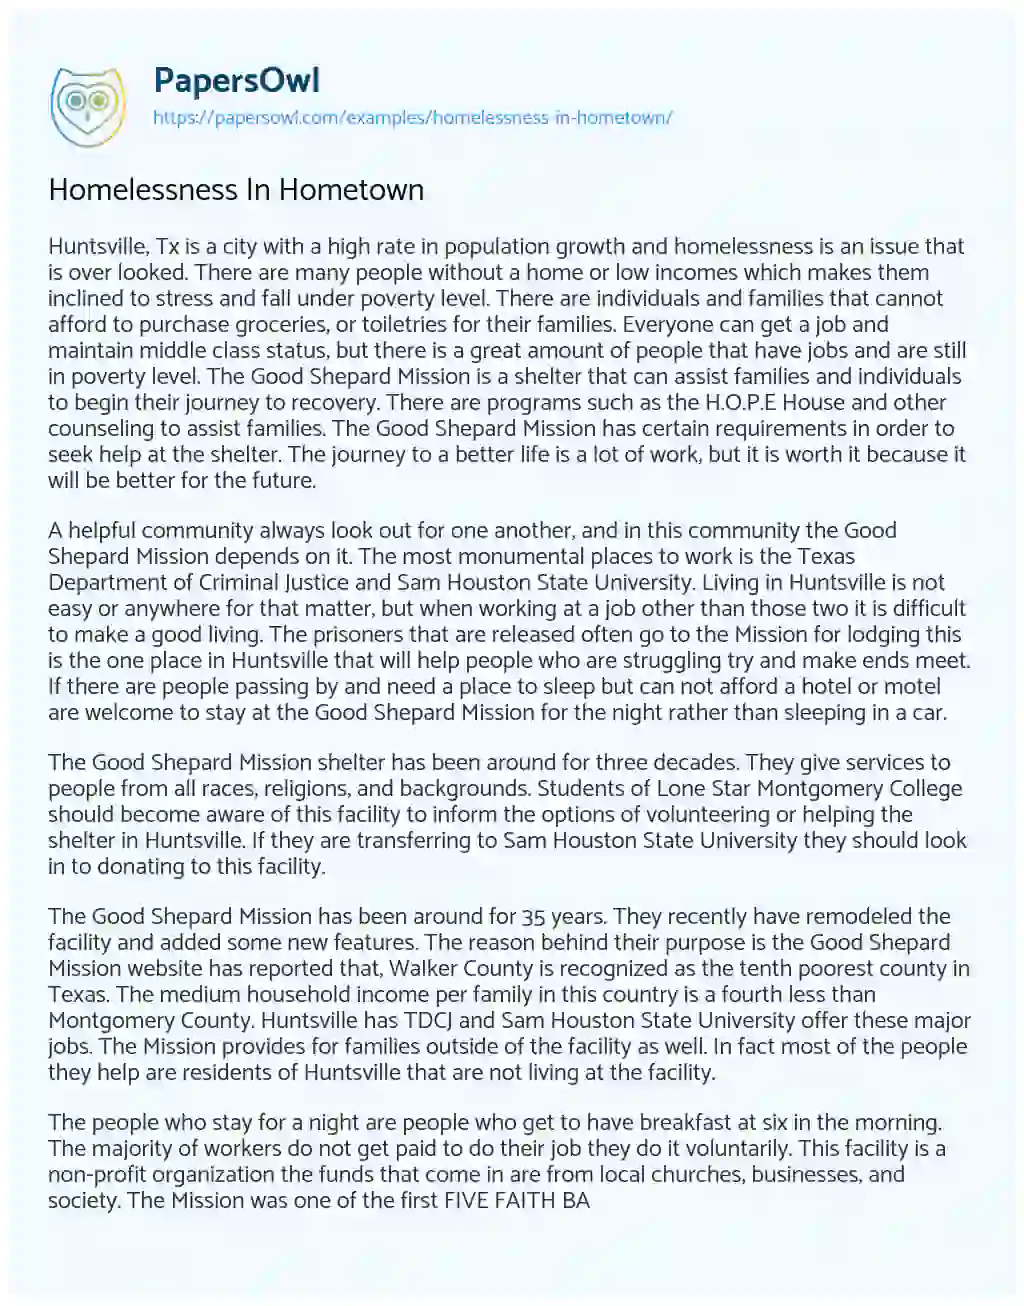 Essay on Homelessness in Hometown